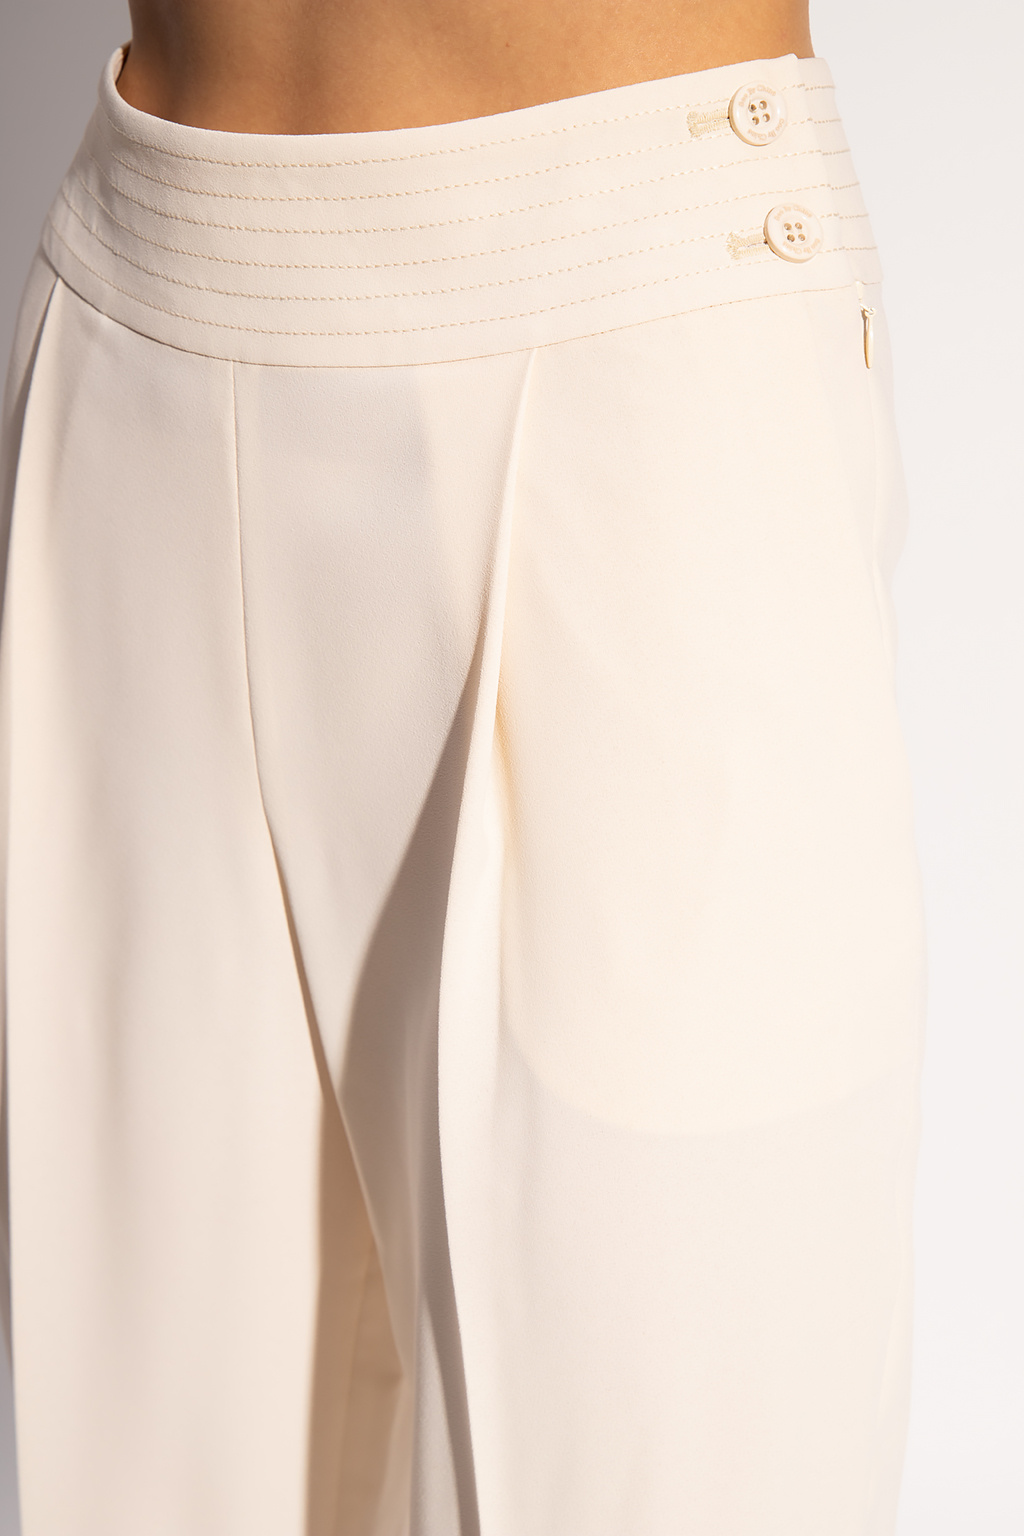 See By Chloe High-waisted light trousers